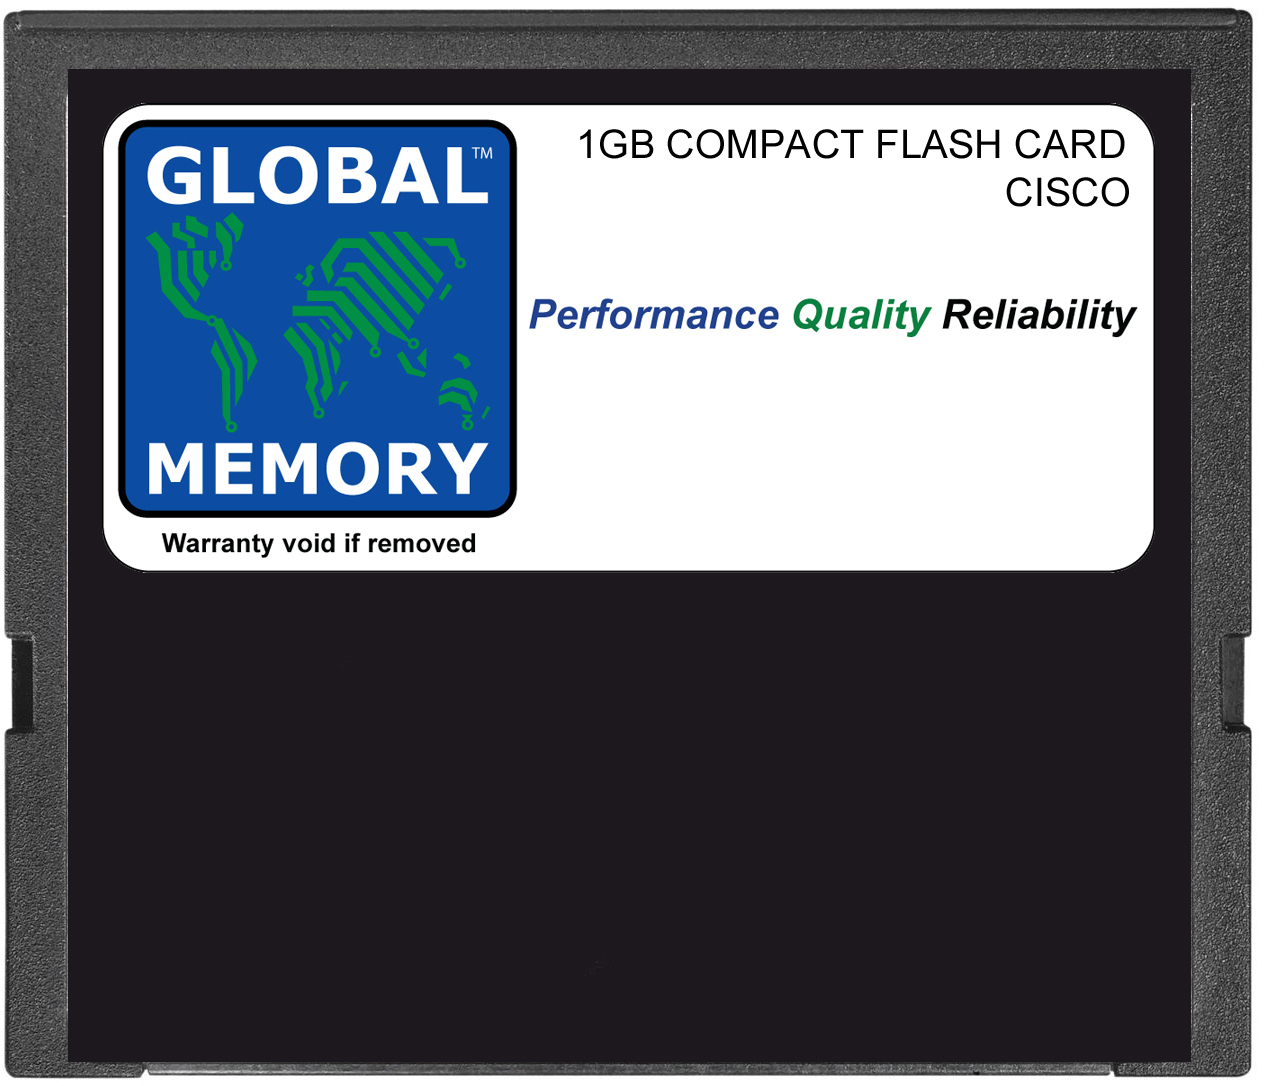 1GB COMPACT FLASH CARD MEMORY FOR CISCO XR12000 SERIES ROUTERS PRP-2 ROUTE PROCESSORS (FLASH-PRP2-1G)